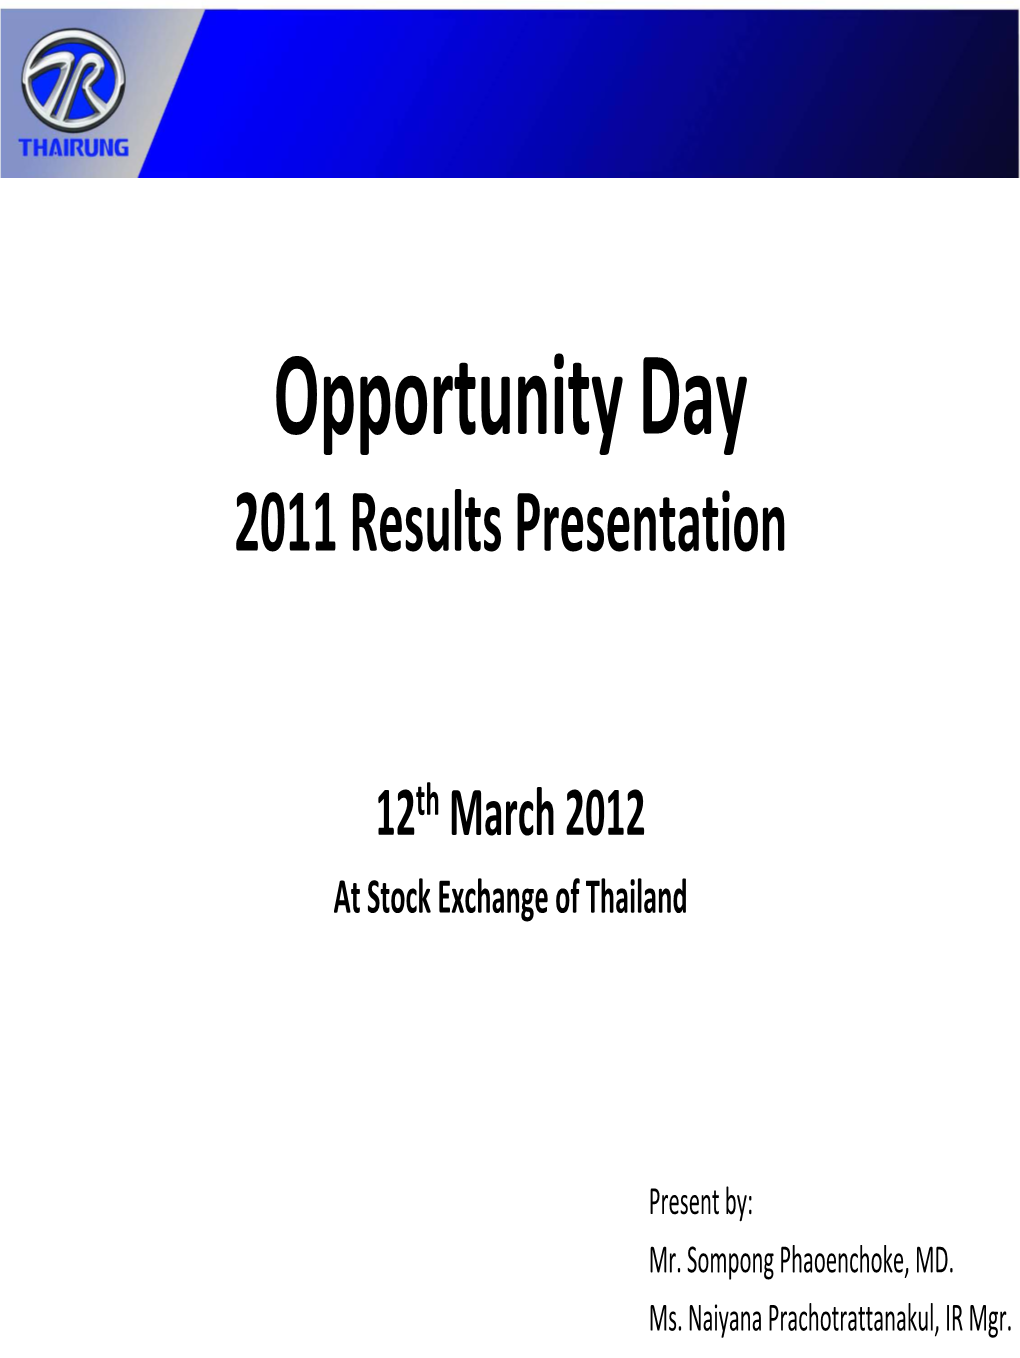 Opportunity Day 2011 Results Presentation